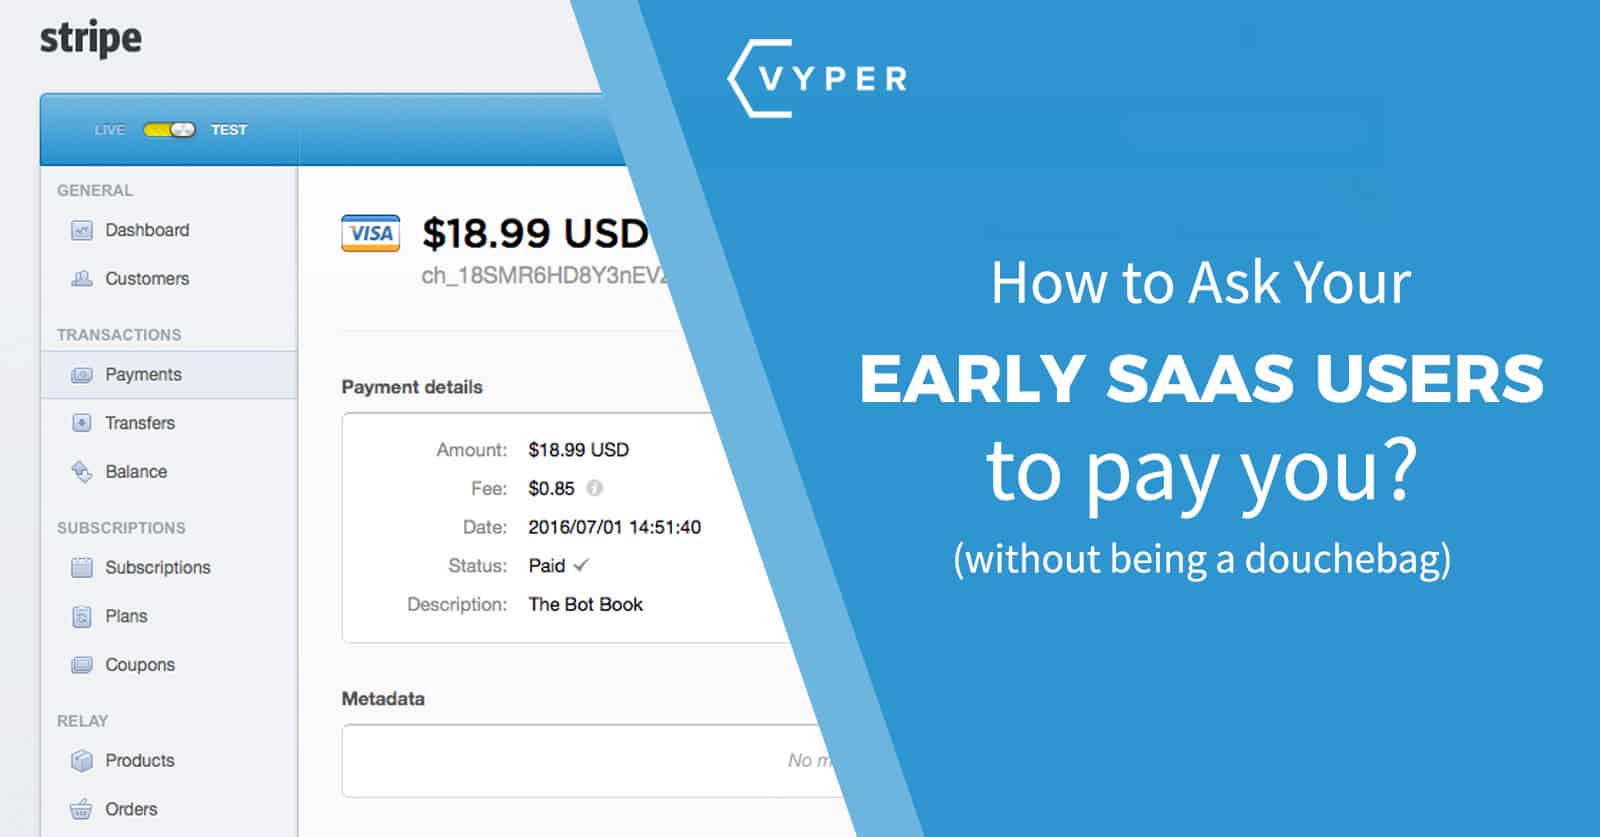 How to Ask Your Early SaaS Users to Pay You (Without Being a Douchebag)